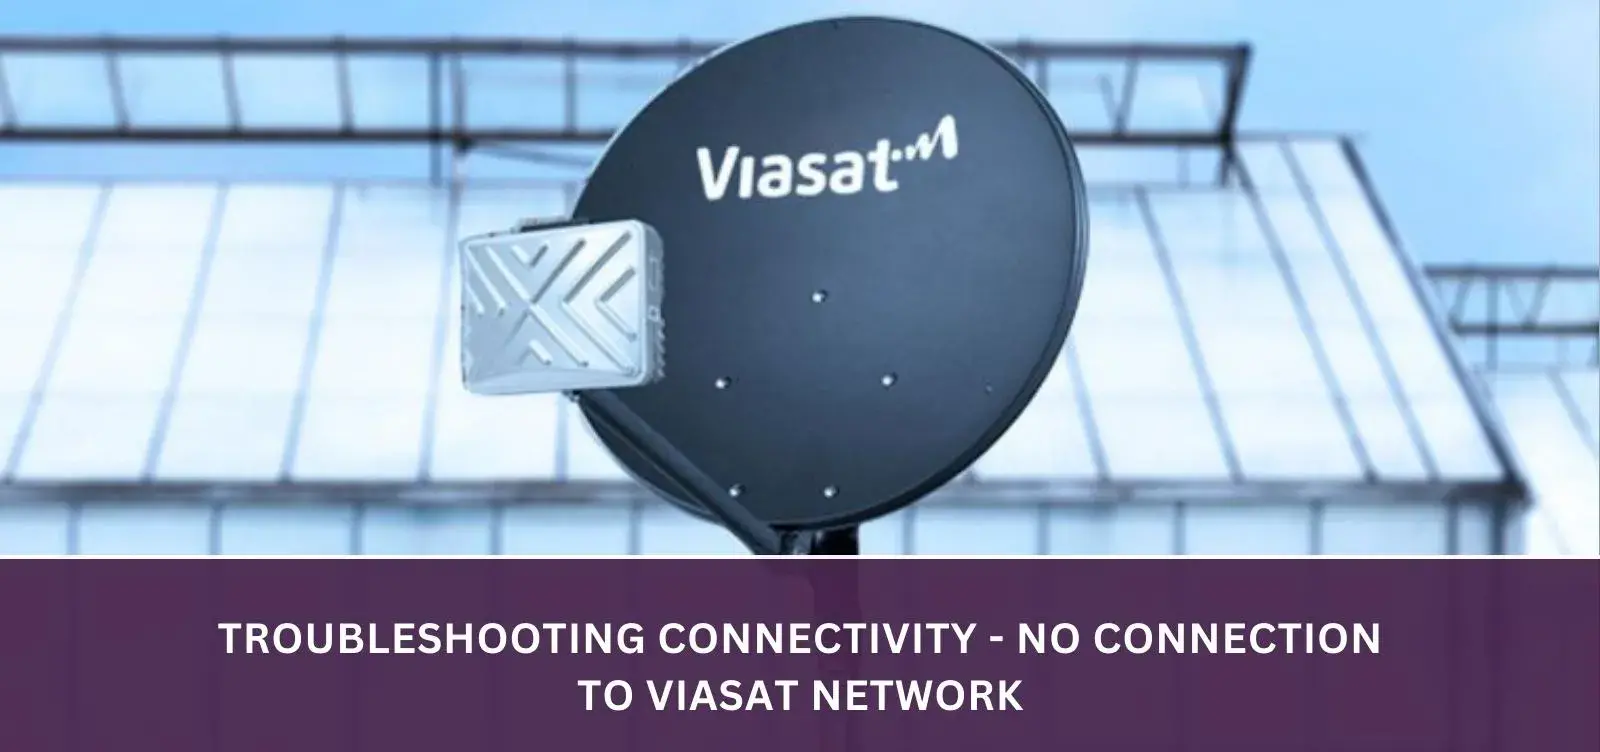 Troubleshooting Connectivity - No connection to Viasat network